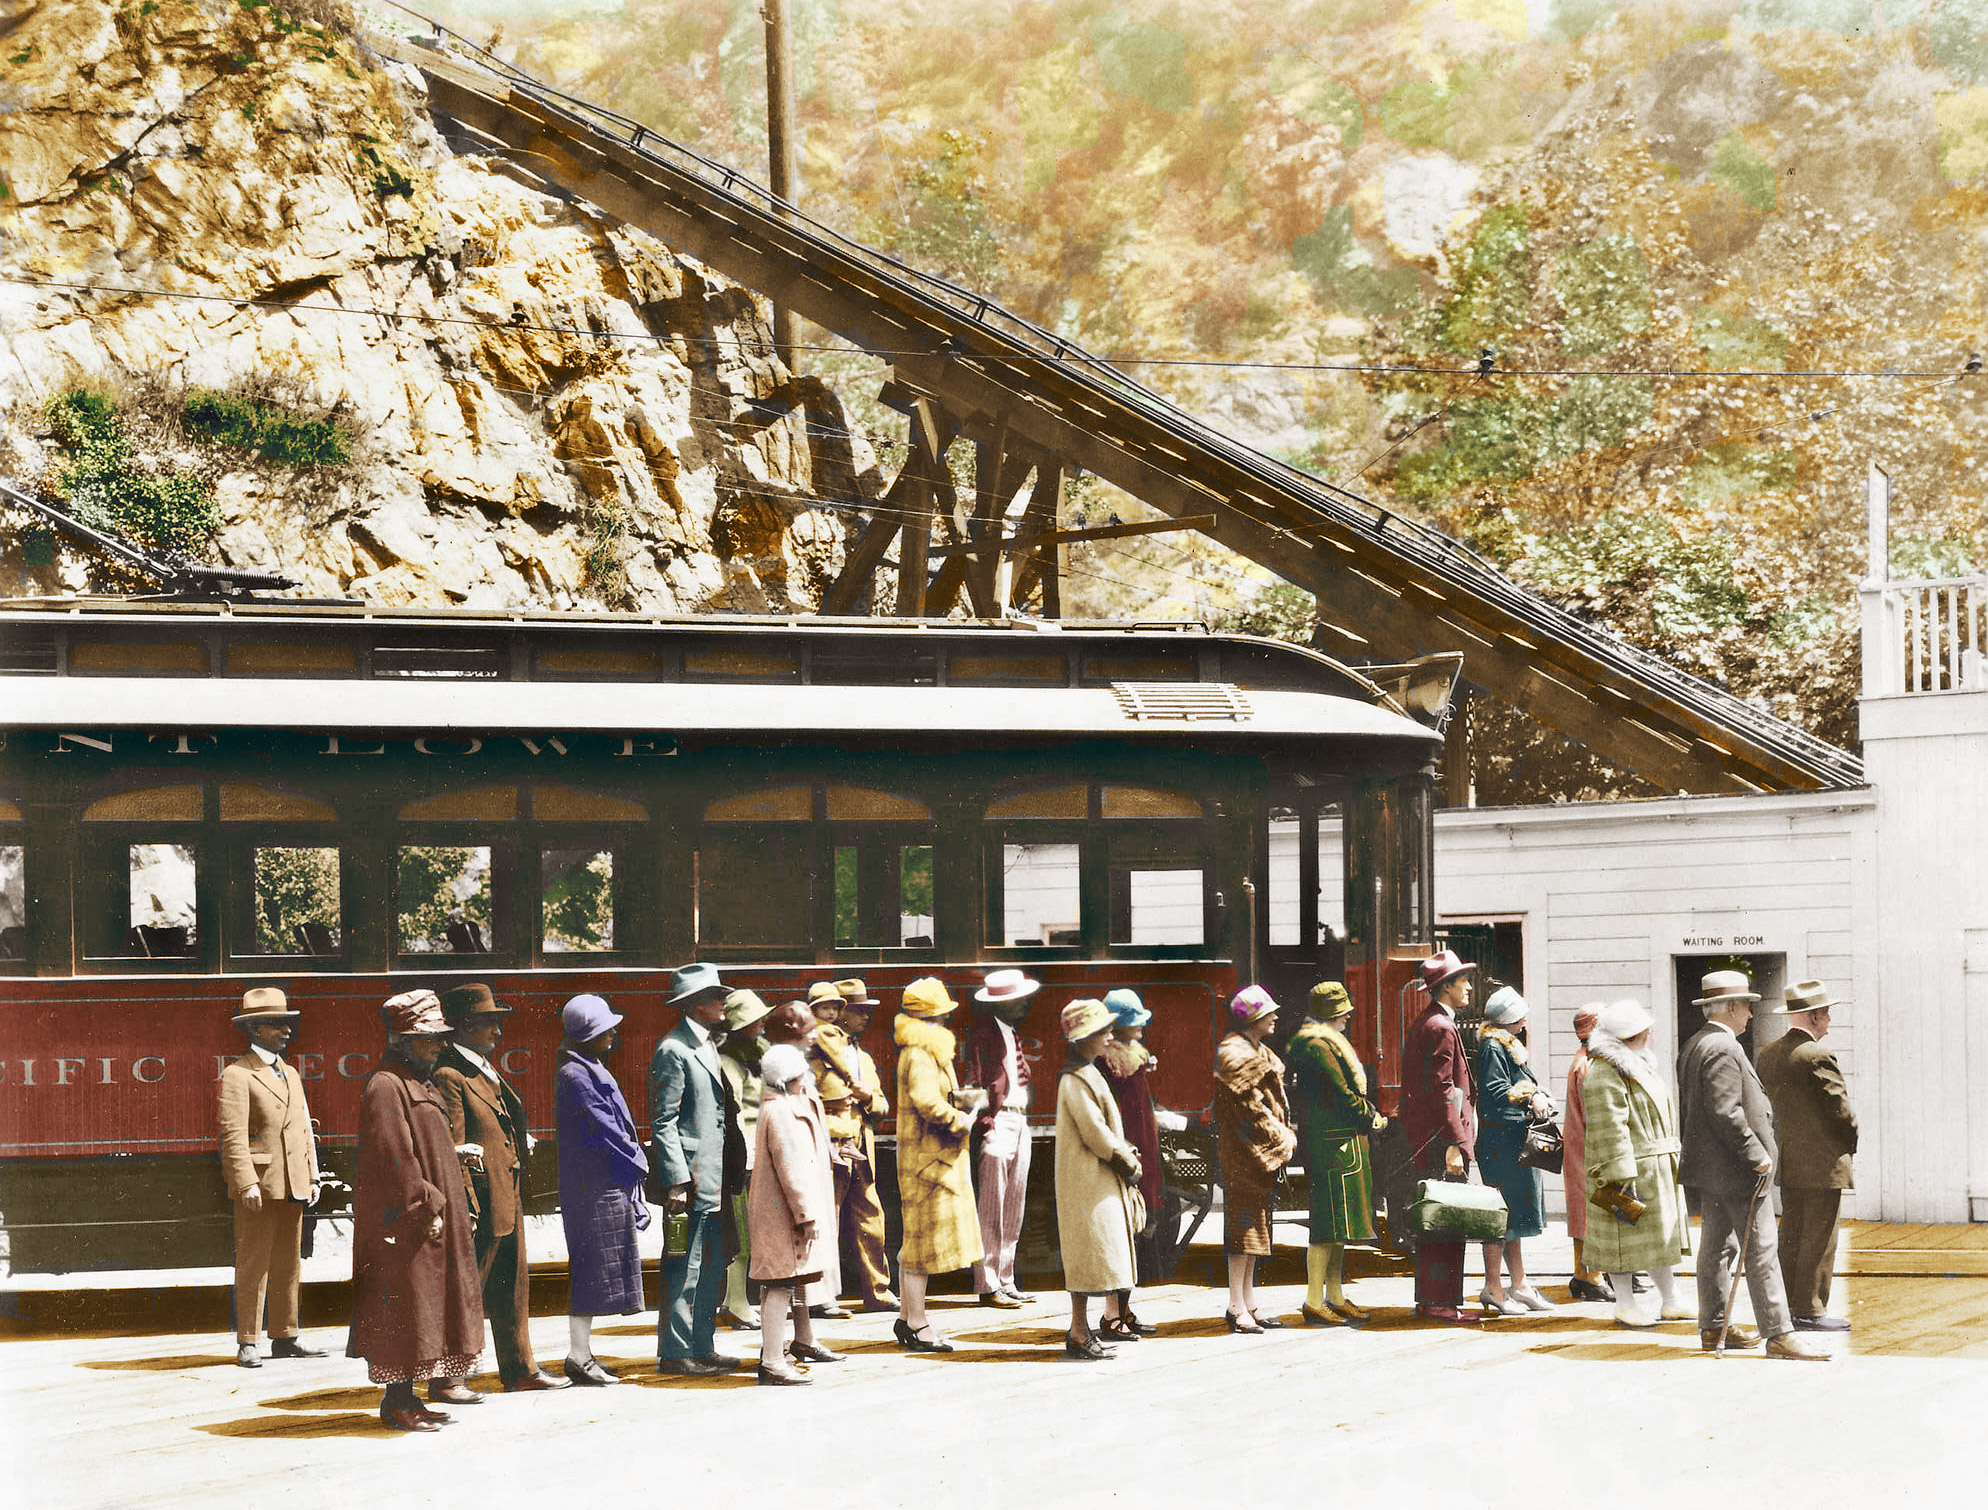 Here is a hand-colored image that was originally shot by Charles Lawrence, the official photographer of the Pacific Electric Railway, colorized by San Diego resident and railfan Bjorn Palenius. He has enhanced this image for everyone to enjoy, and we are grateful for his efforts and contributions. Charles Lawrence Photo, Bjorn Palenius Colorization